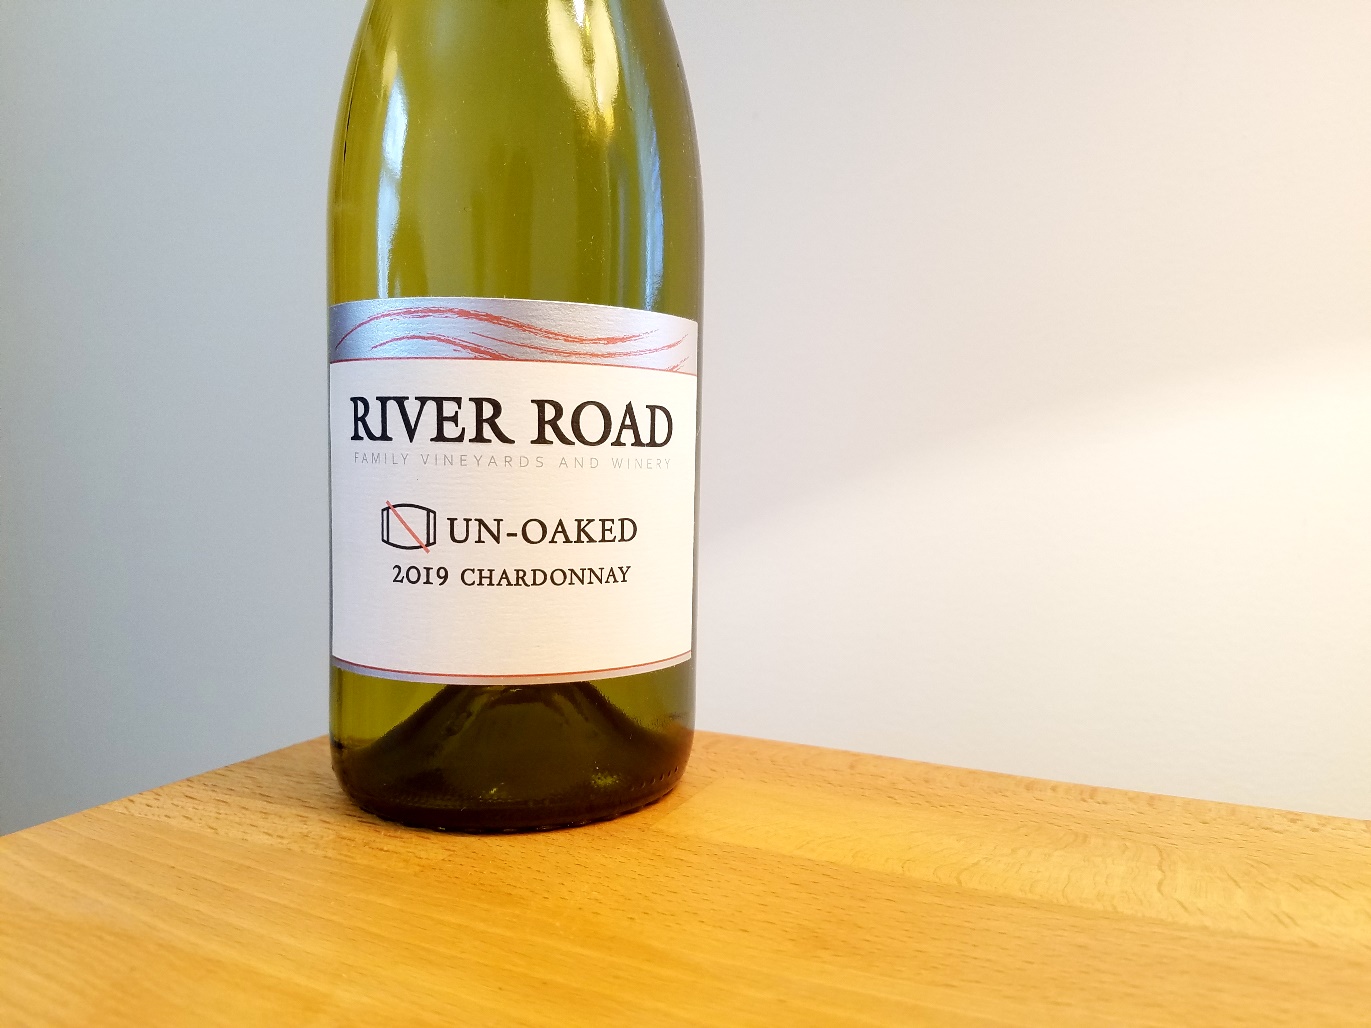 River Road Family Vineyards and Winery, Un-Oaked Chardonnay 2019, California, Wine Casual